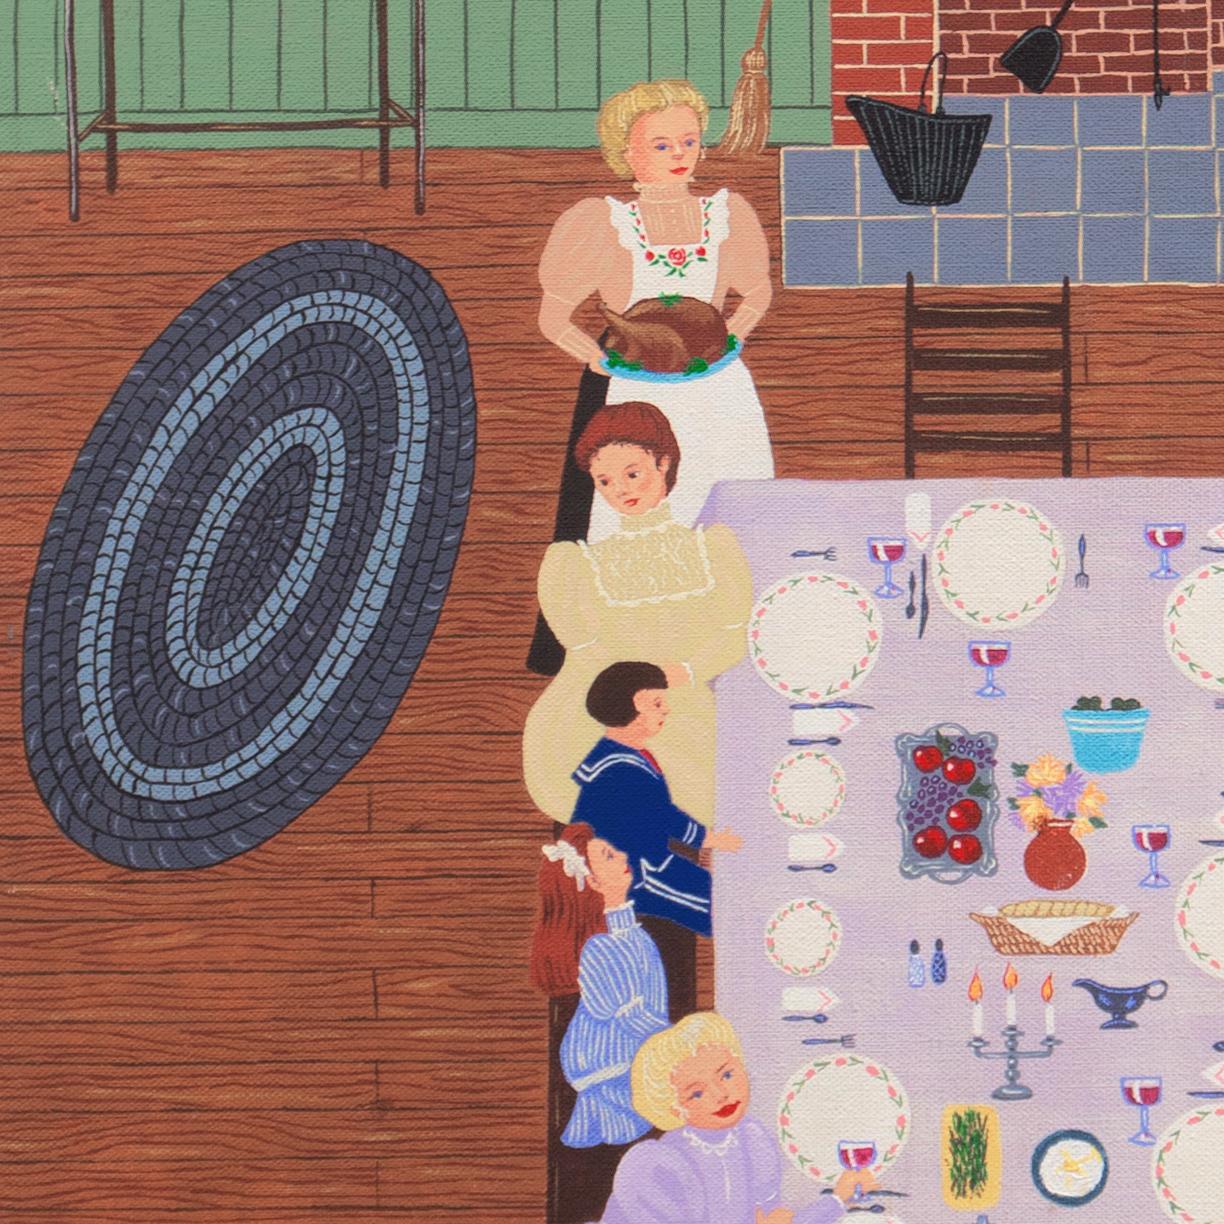 'The Family Dinner', Thanksgiving, Christmas, Festive Reunion, Large Naive Oil - Folk Art Painting by Jacalyn Pauer